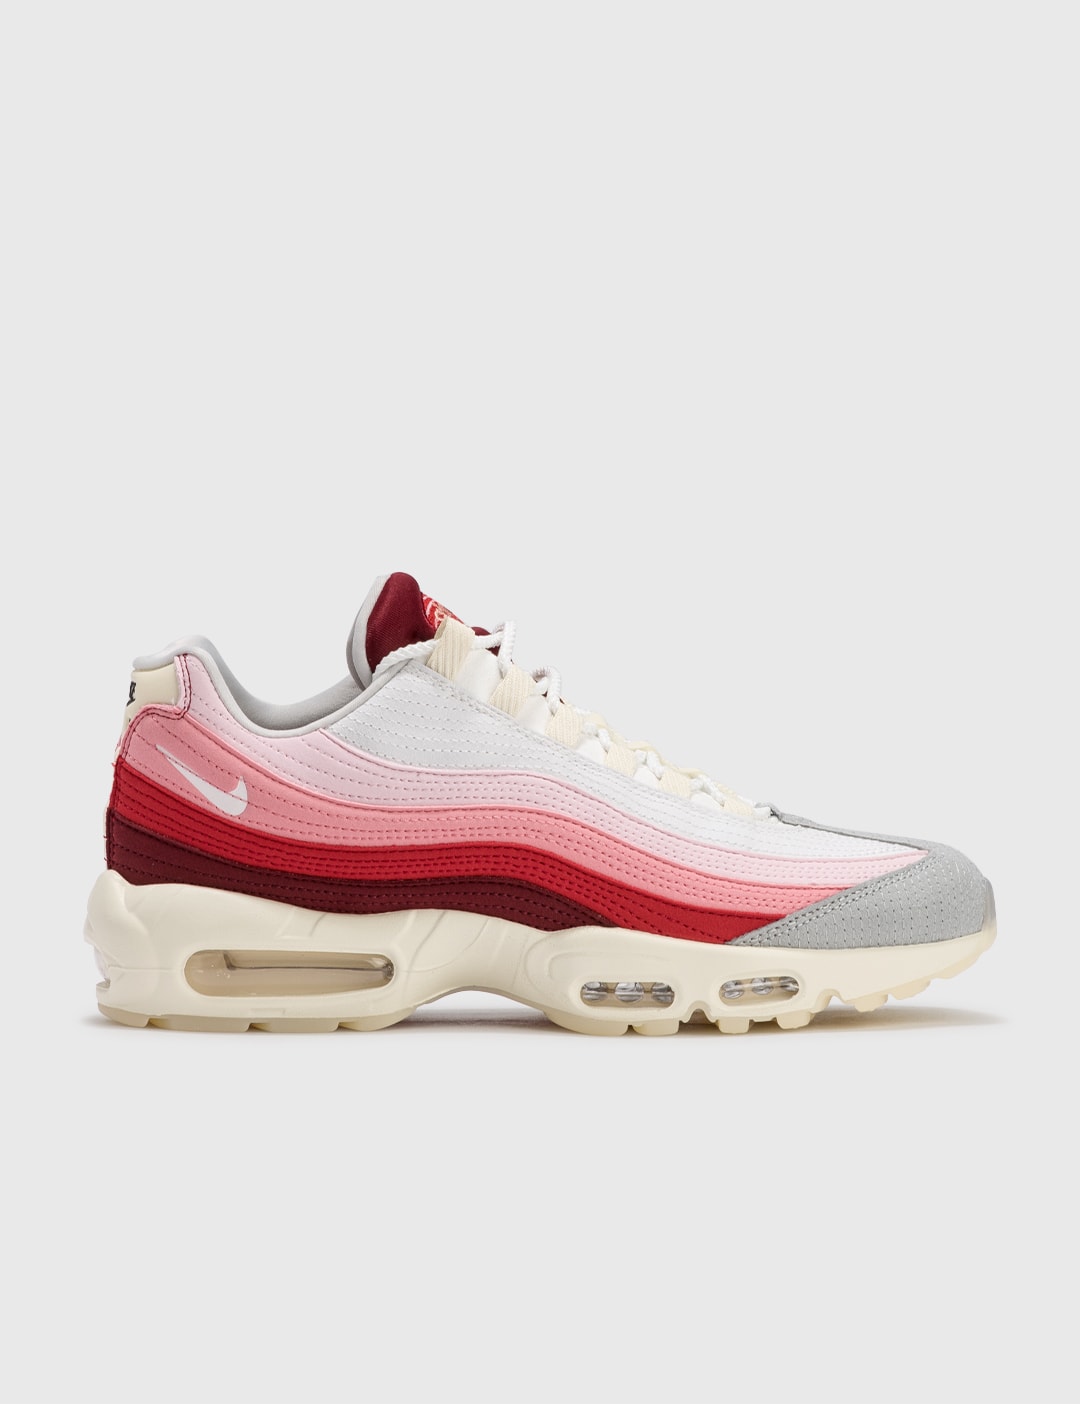 Nike - Nike Air Max 95 QS “Anatomy of Air” | HBX - Globally Curated Fashion and Lifestyle by